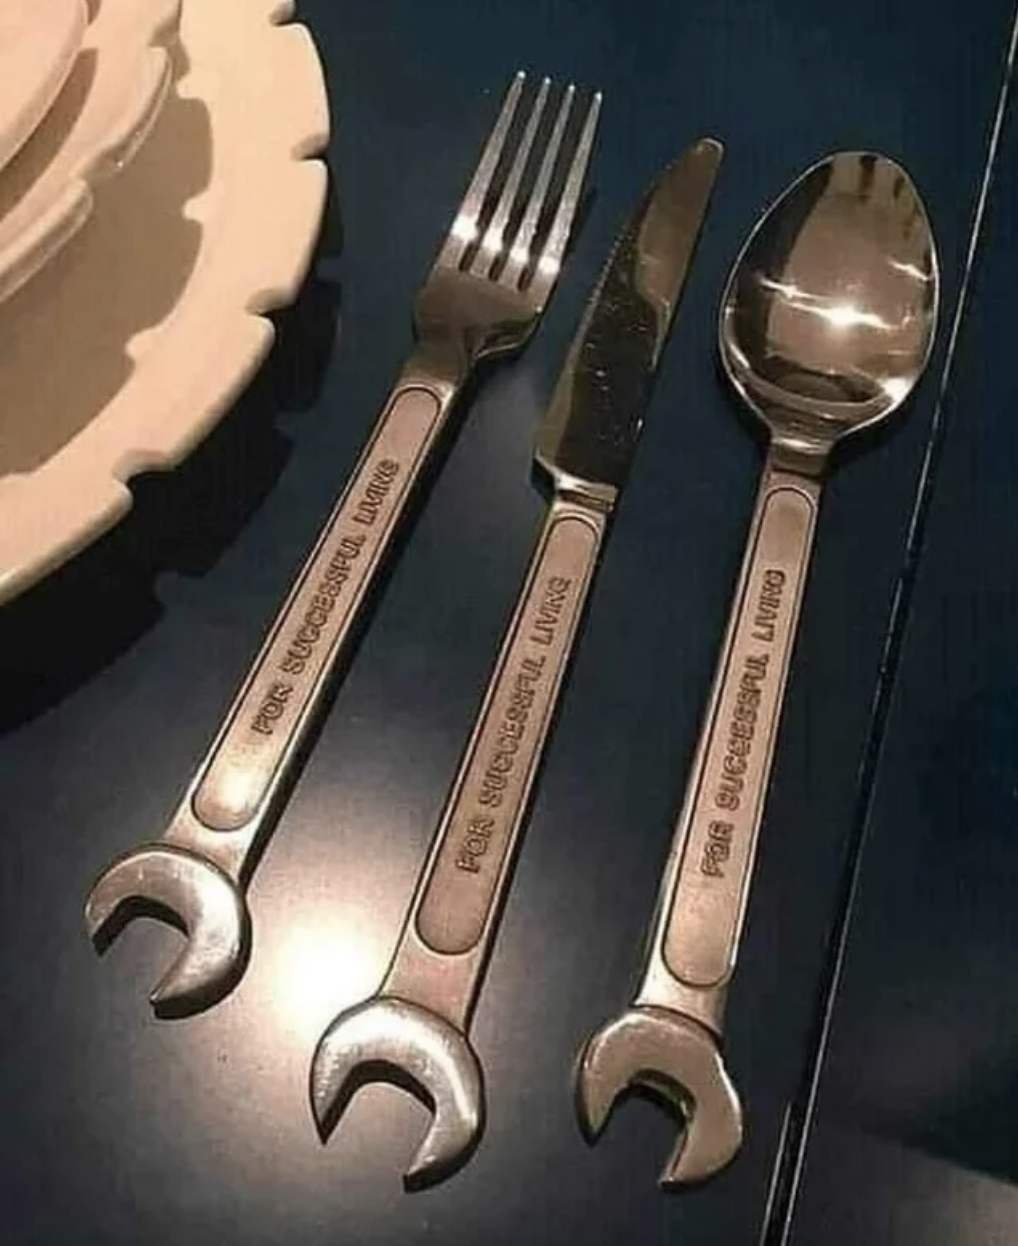 fork, spoon, and knife on one side and wrench on the other